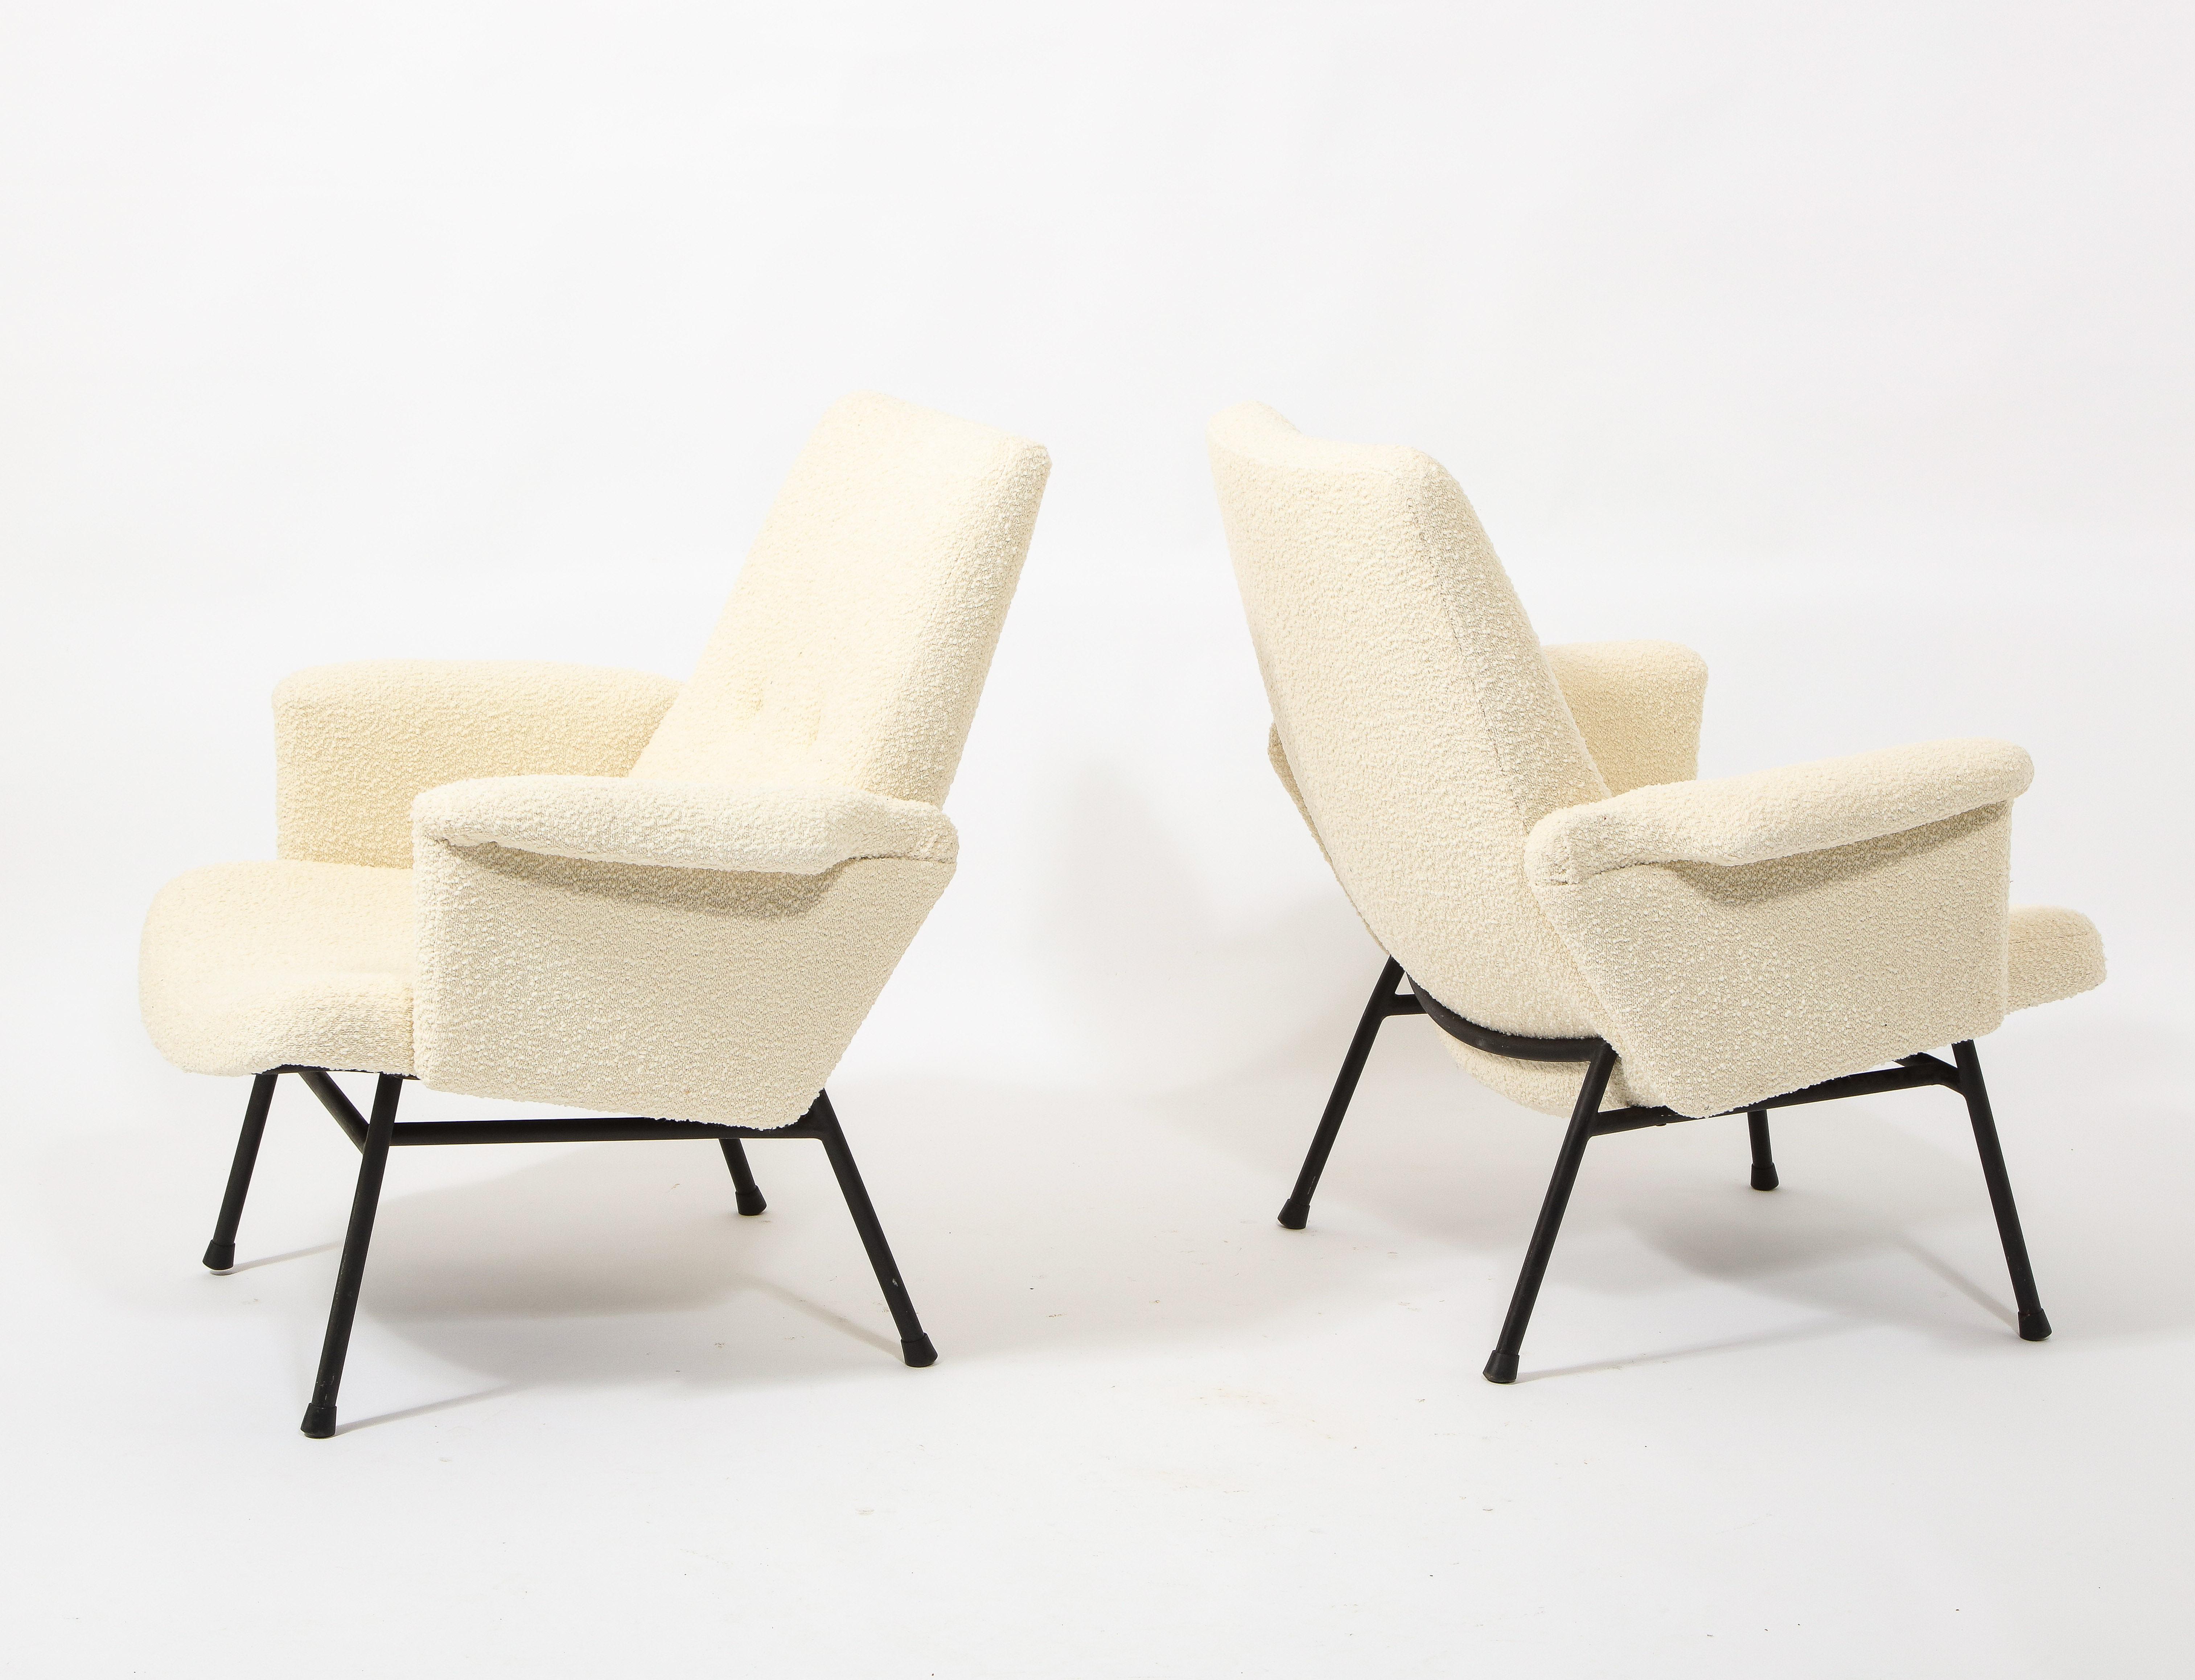 Editions Steiner. Black lacquered feet.
Freshly reupholstered in crème white bouclé by Bisson Bruneel.

Brass necks at the junction of armrests and back.